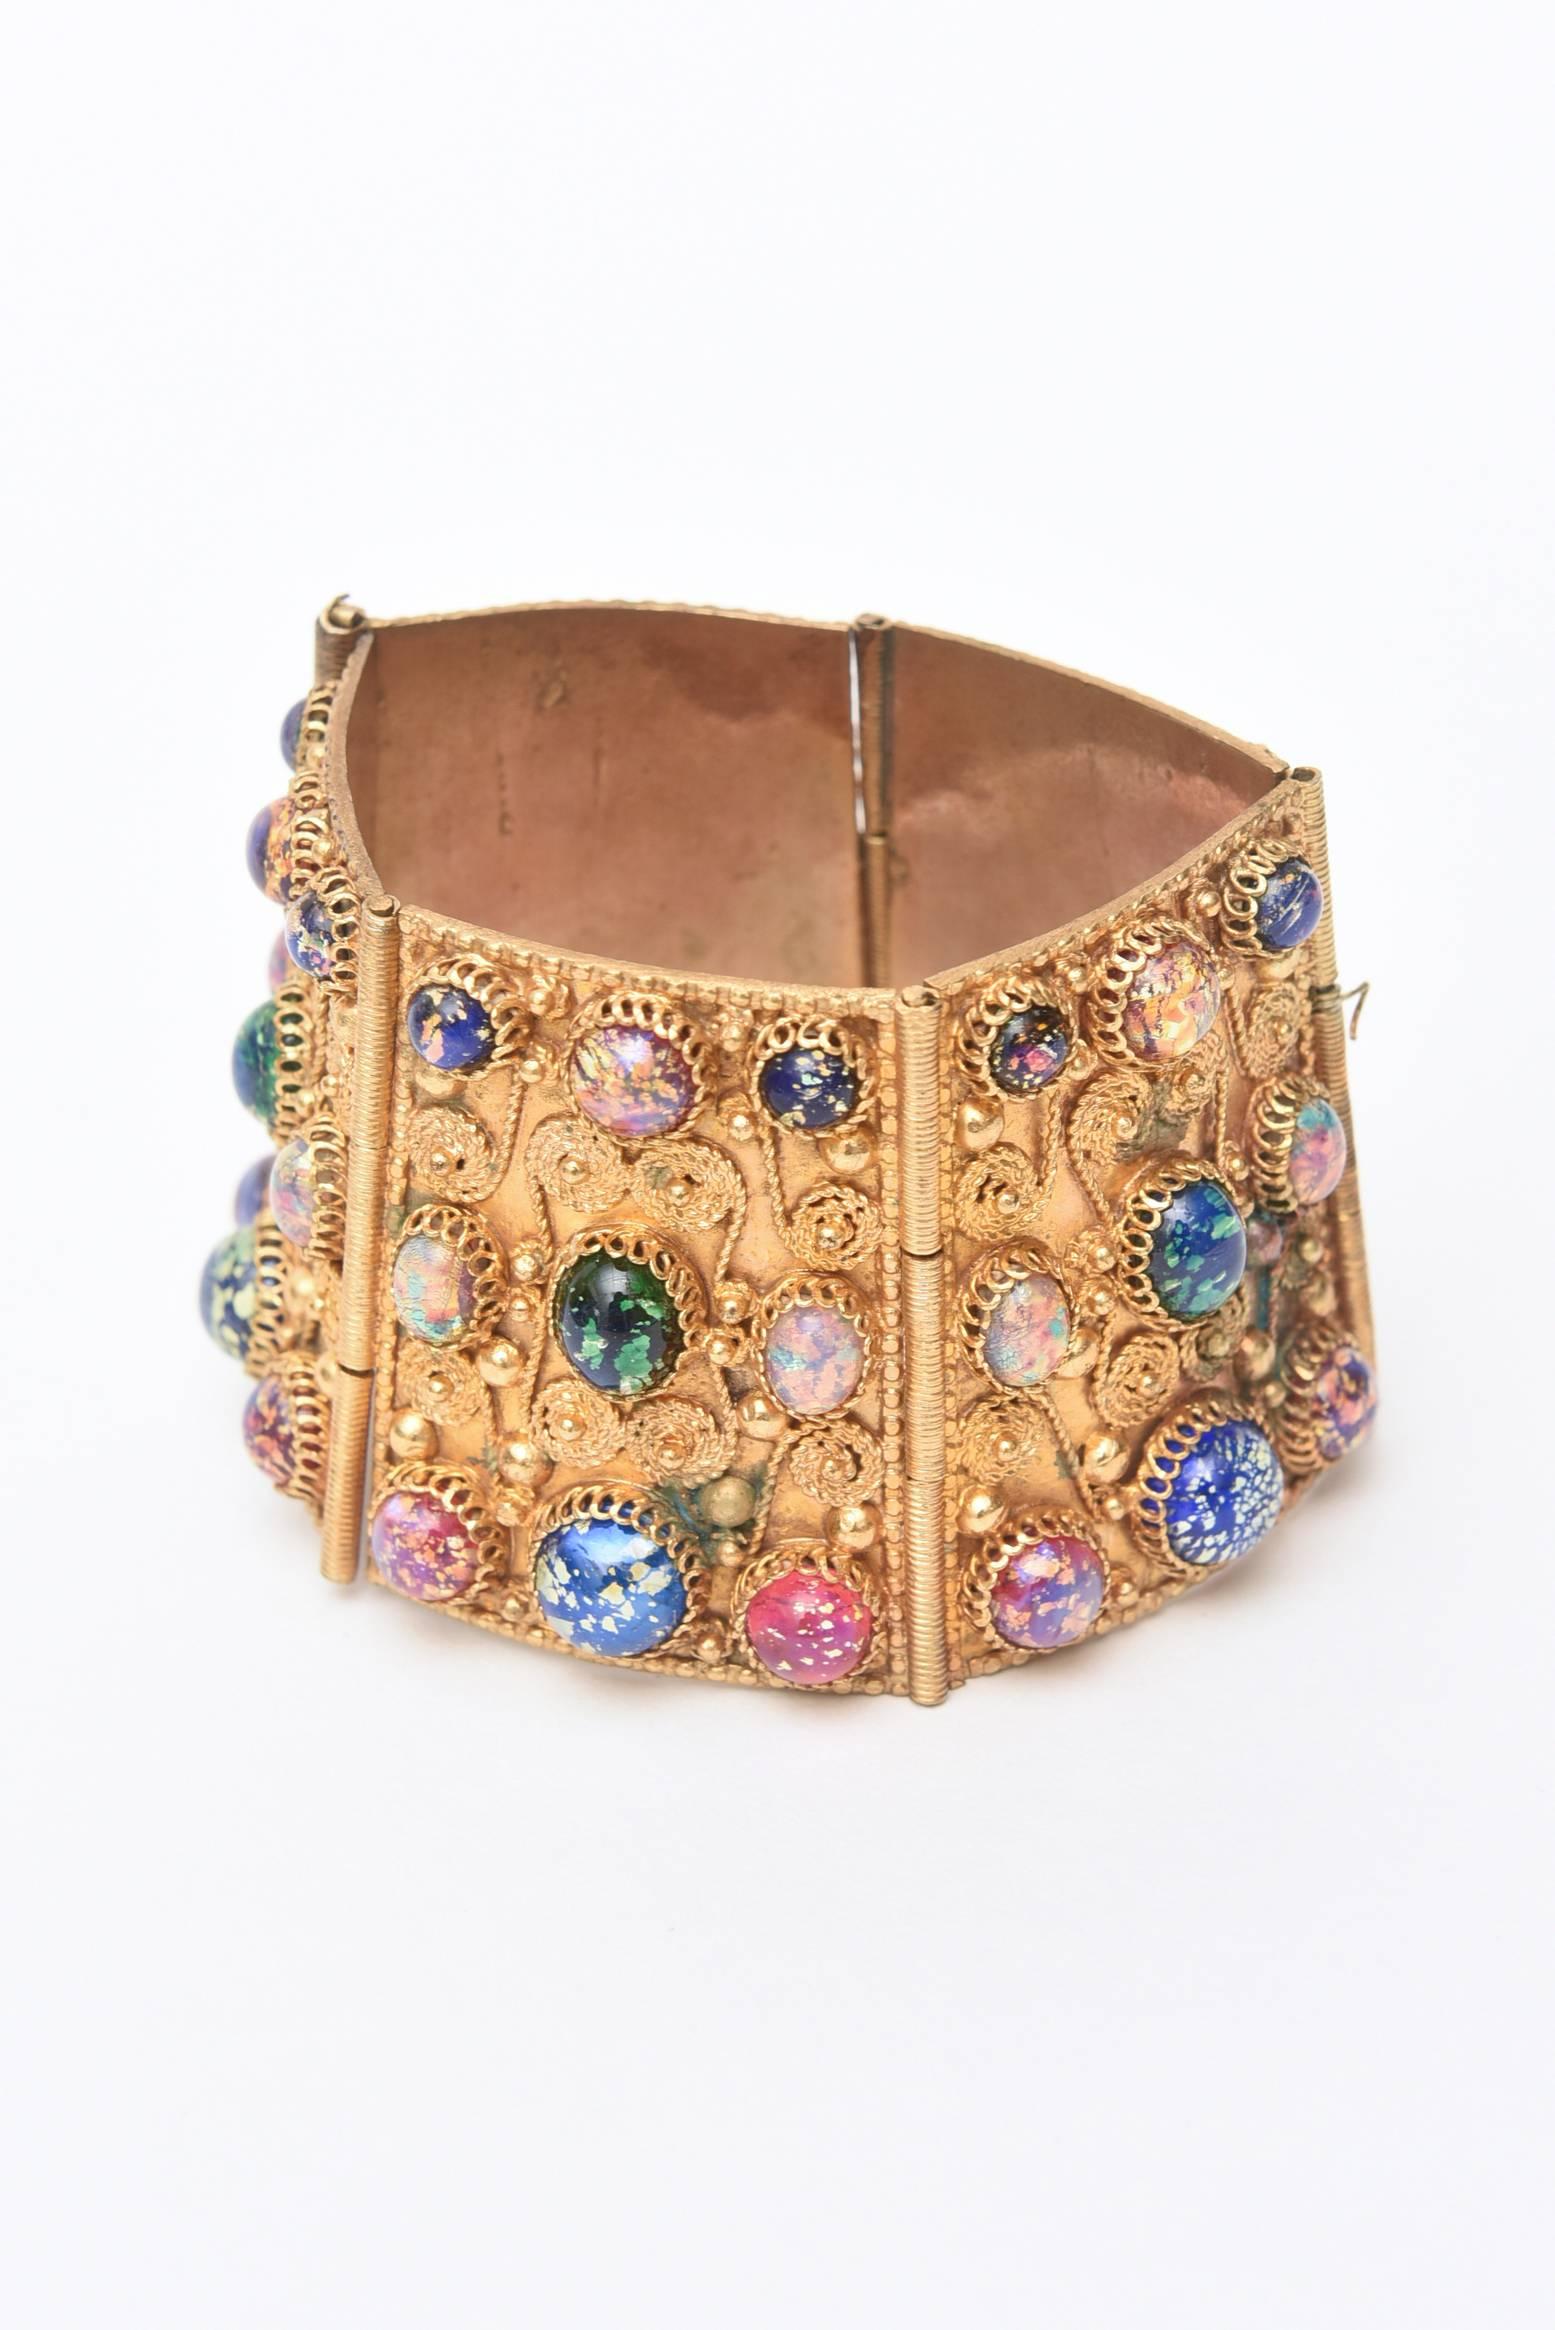 This wonderful set from the 50's is gold plated with an gorgeous array of Aurora Borealis stones set in the filigreed cuff bracelet and the bib collar necklace. This can be worn together or separately. It has an Egyptian Revival meets other worldly